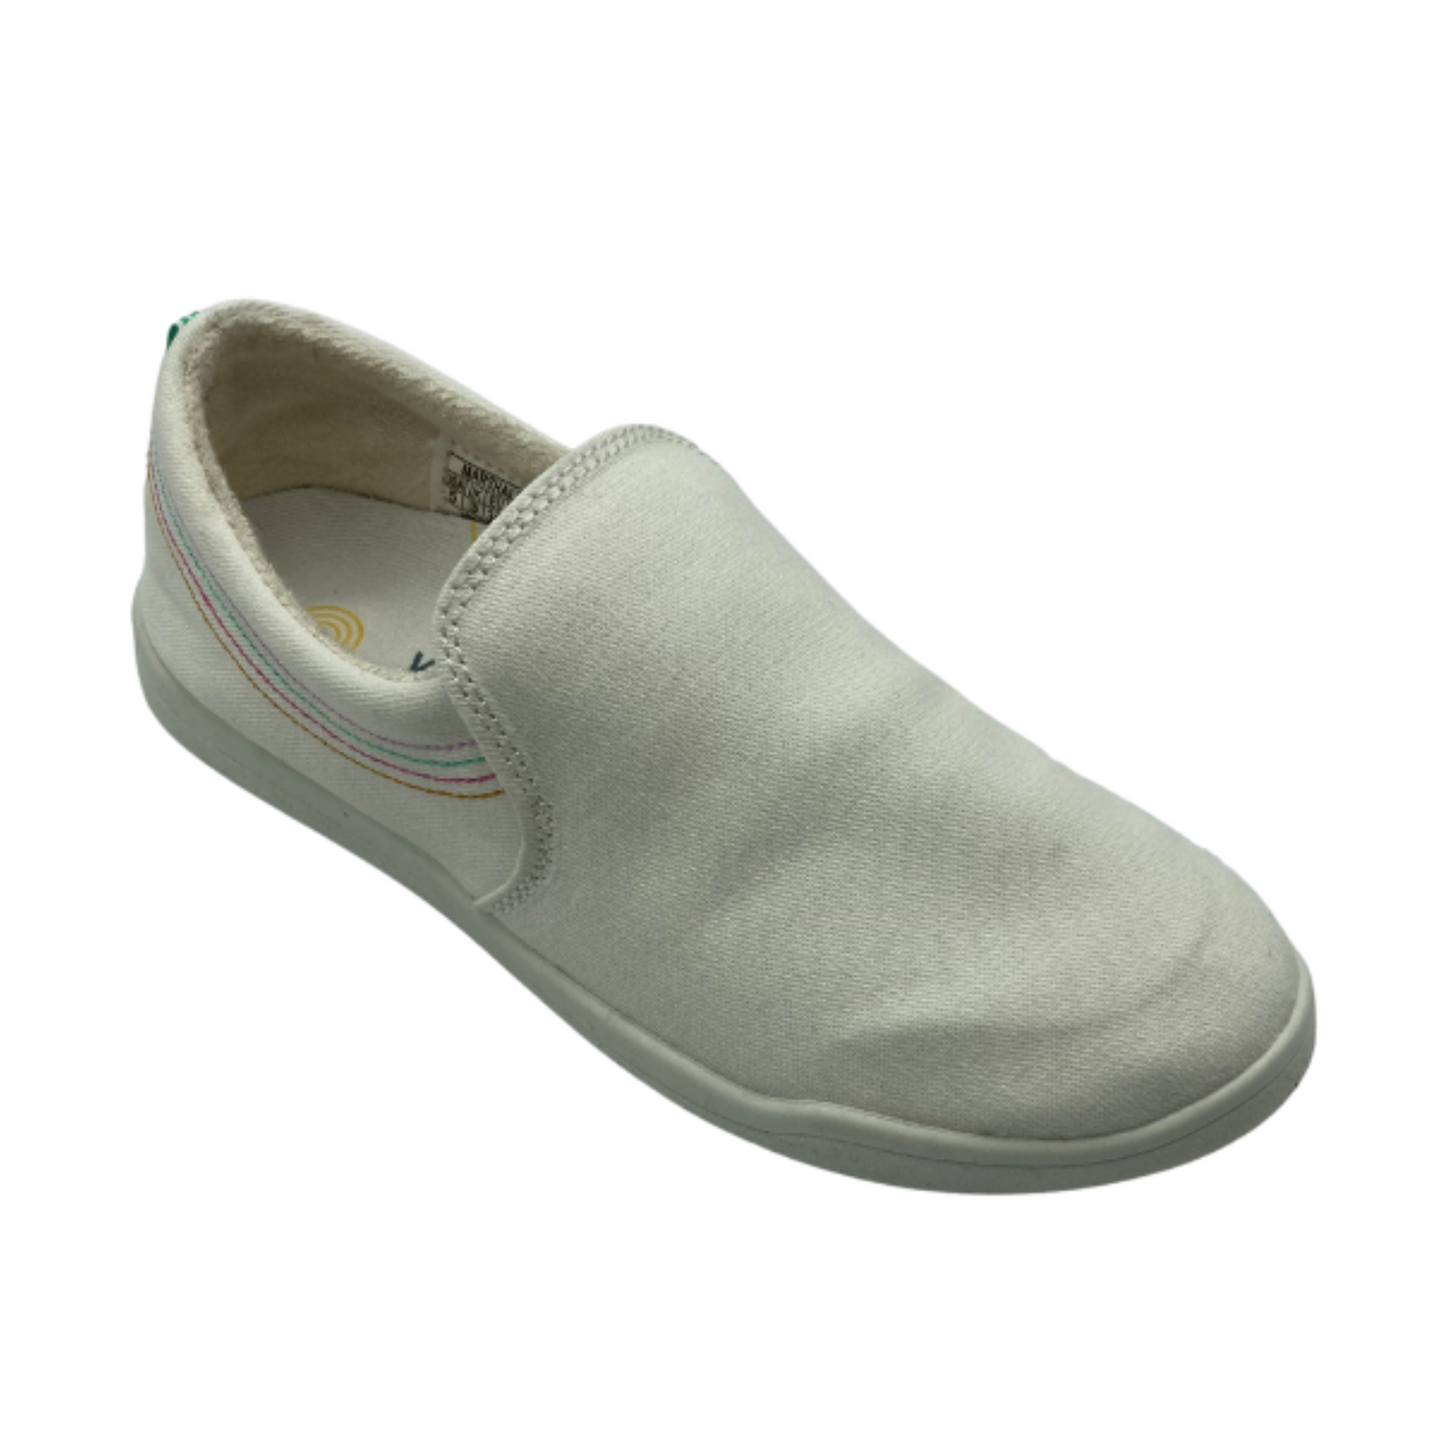 A 45 degree angle view of a white slip-on sneaker with a white outsole.